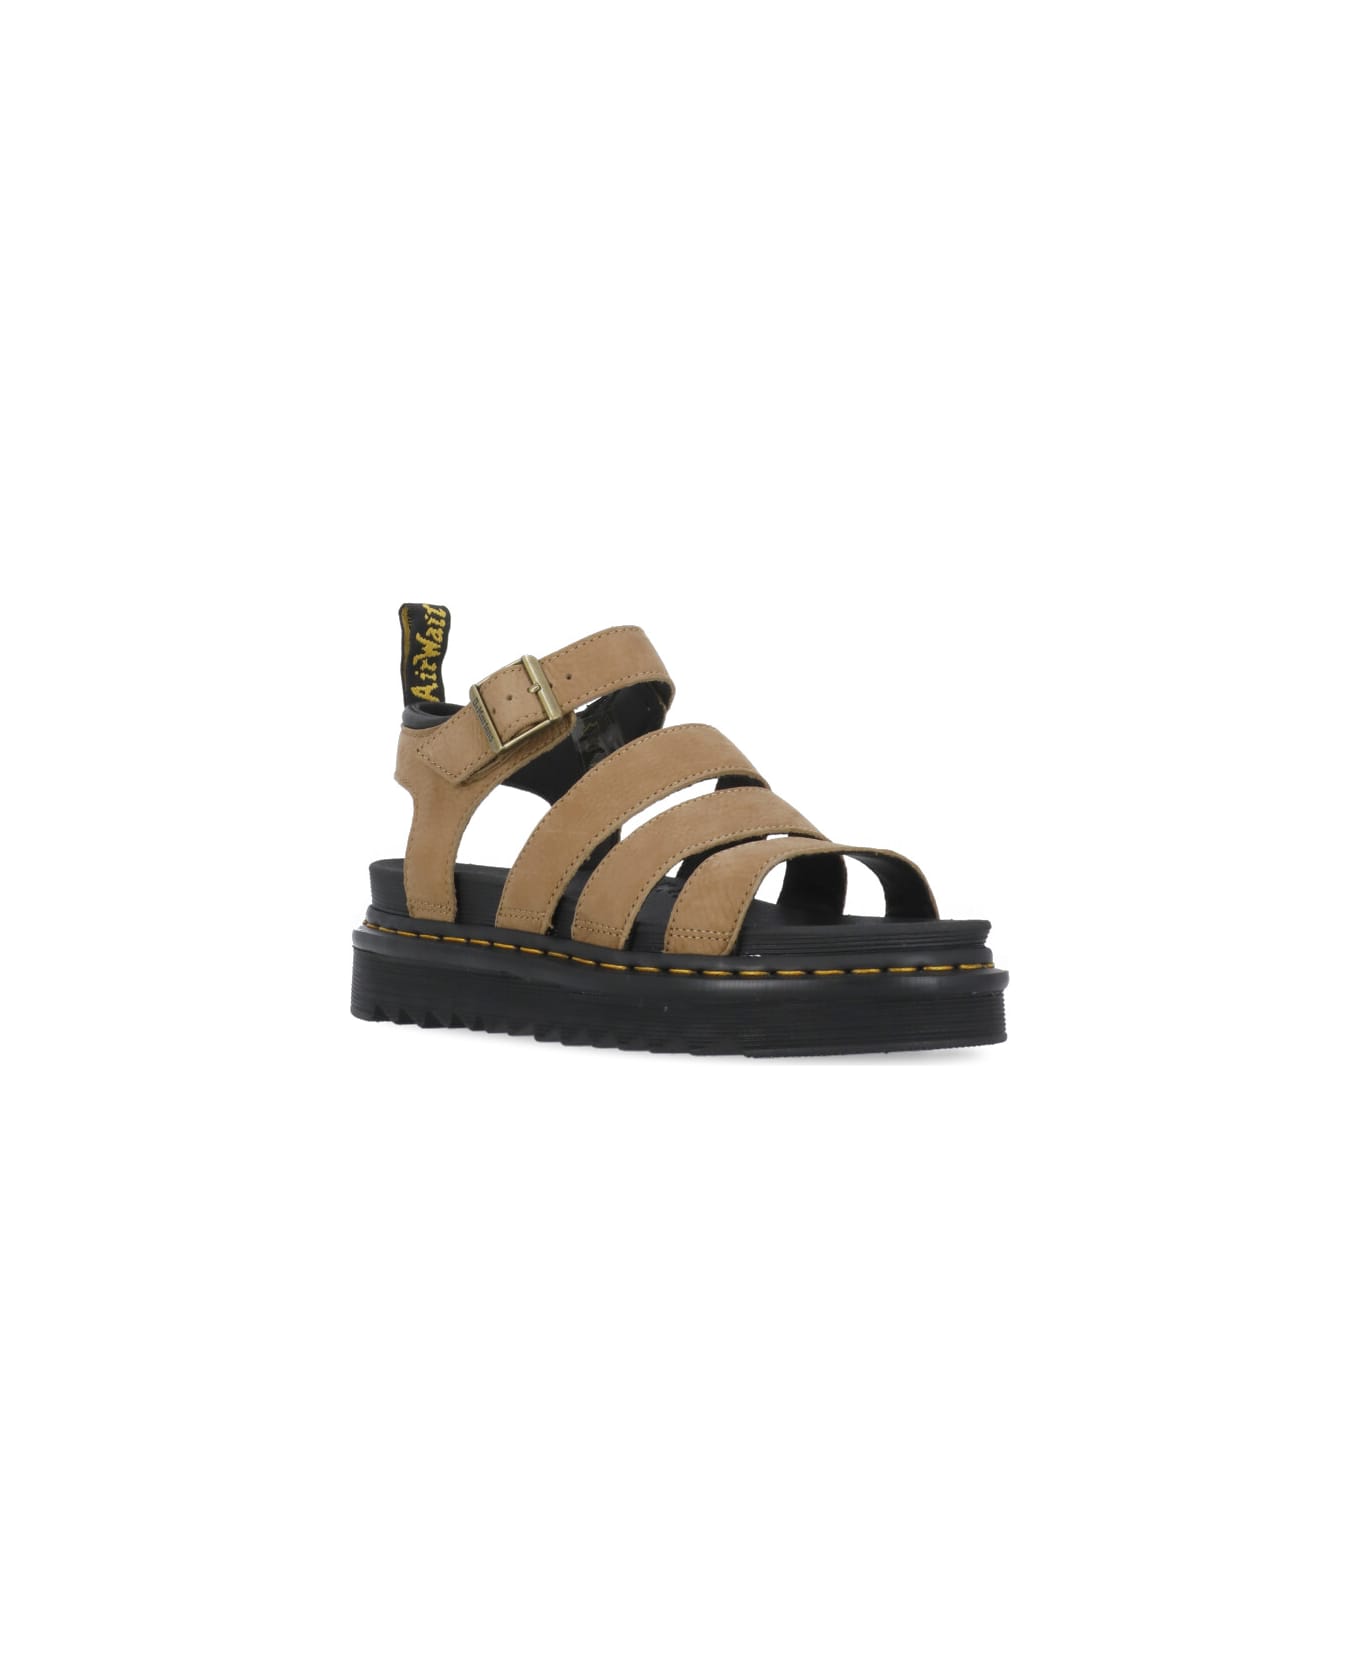 Dr. Martens Blaire Sandals - Brown サンダル